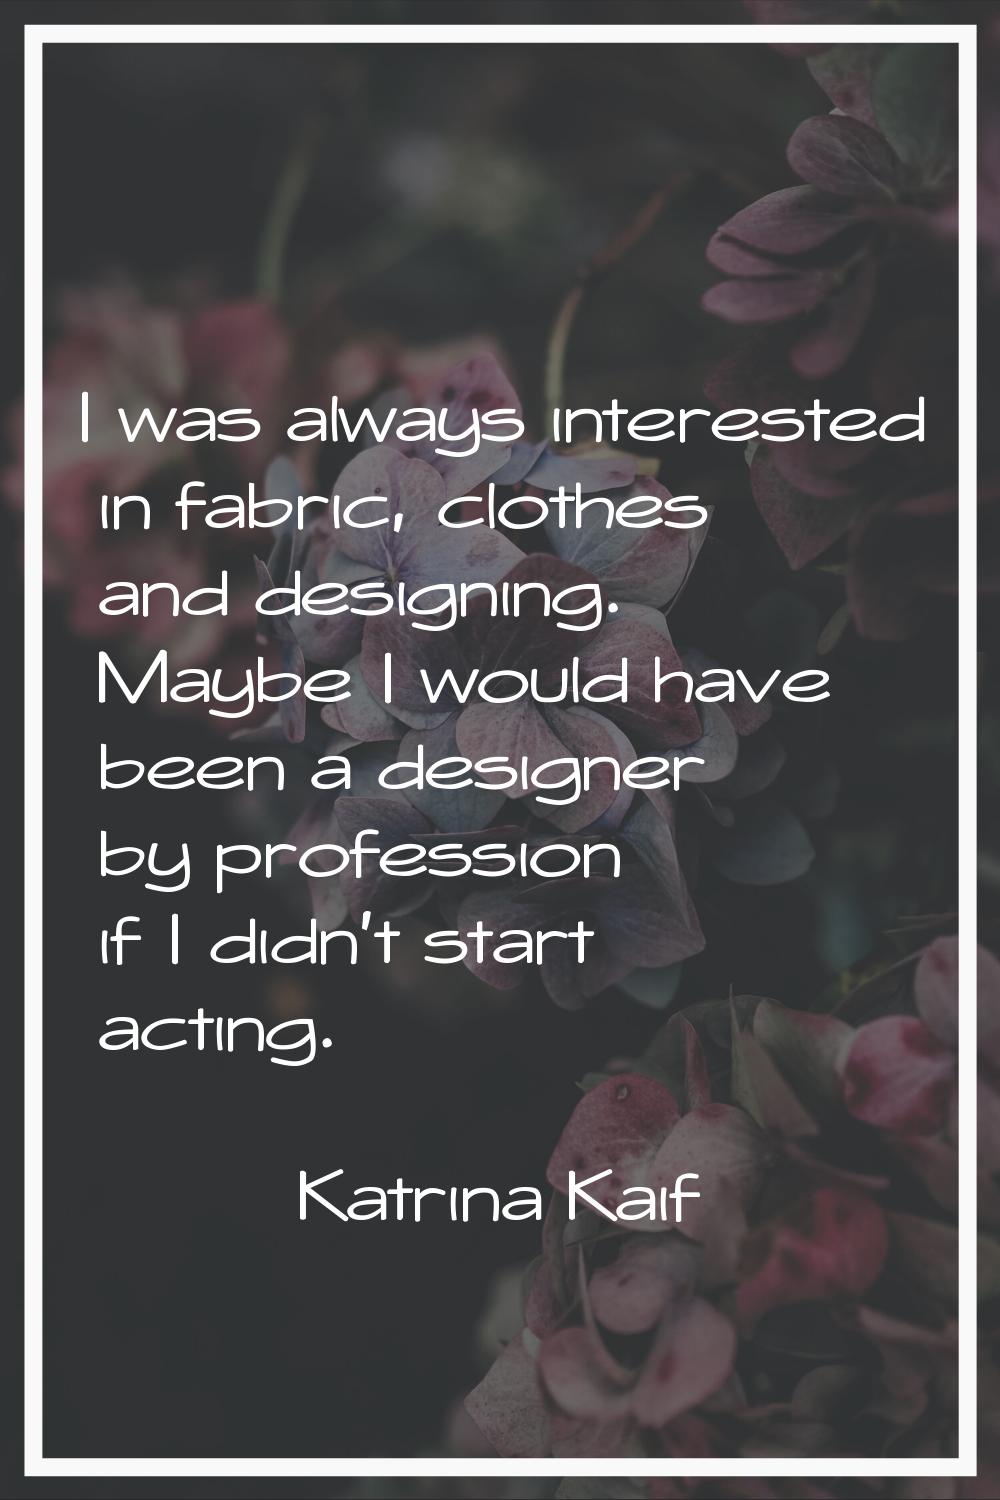 I was always interested in fabric, clothes and designing. Maybe I would have been a designer by pro